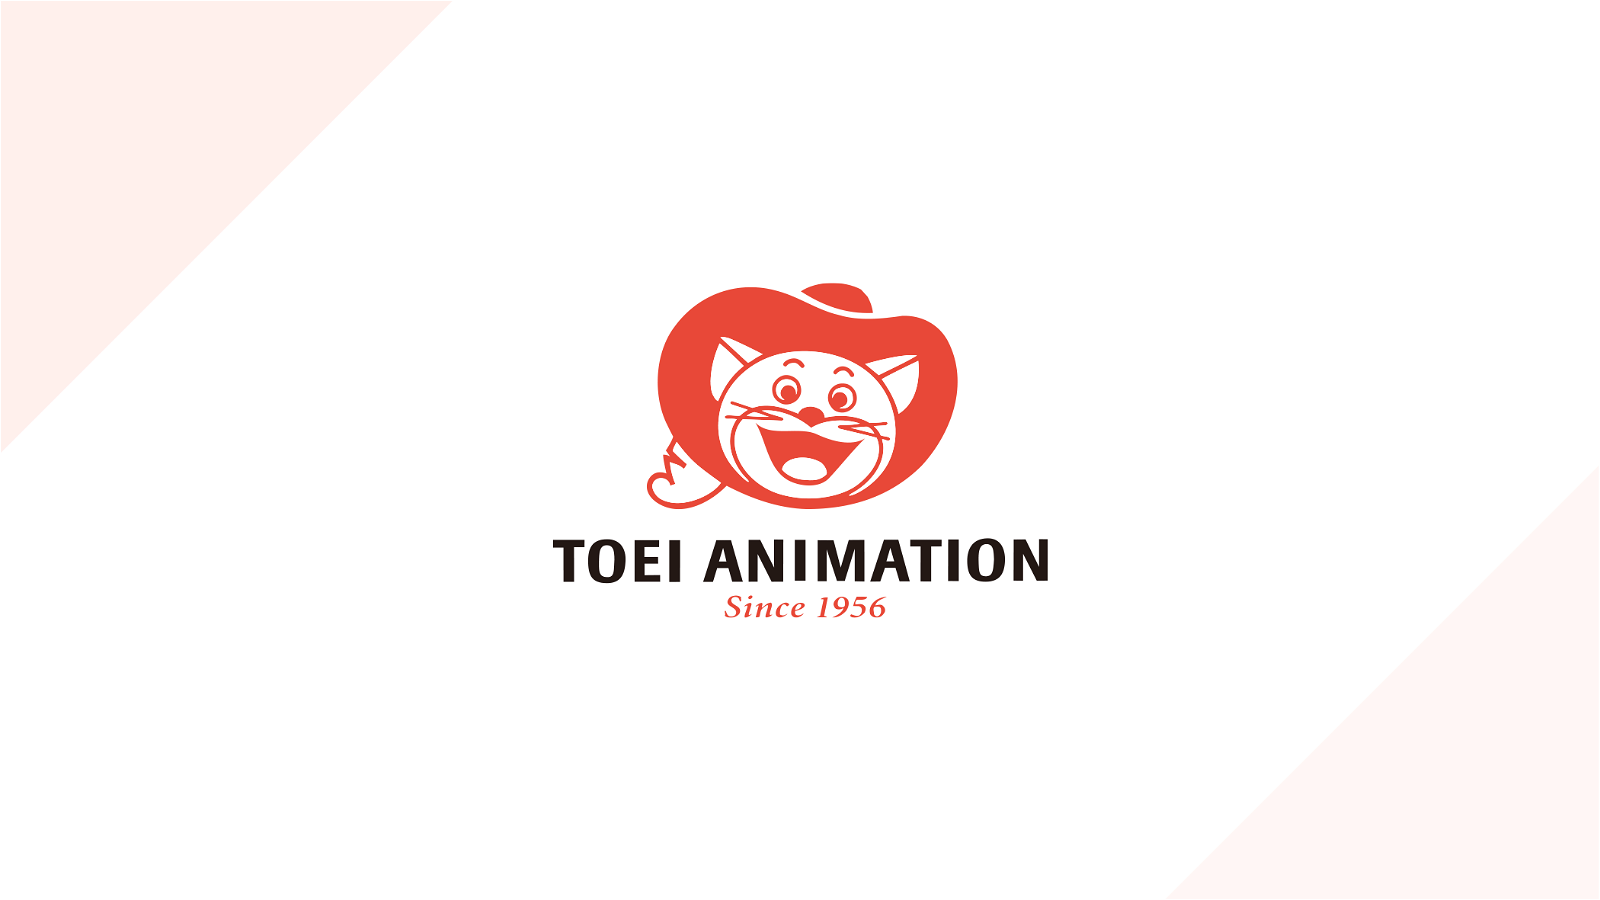 Toei Animation took down Uncle Roger's Video